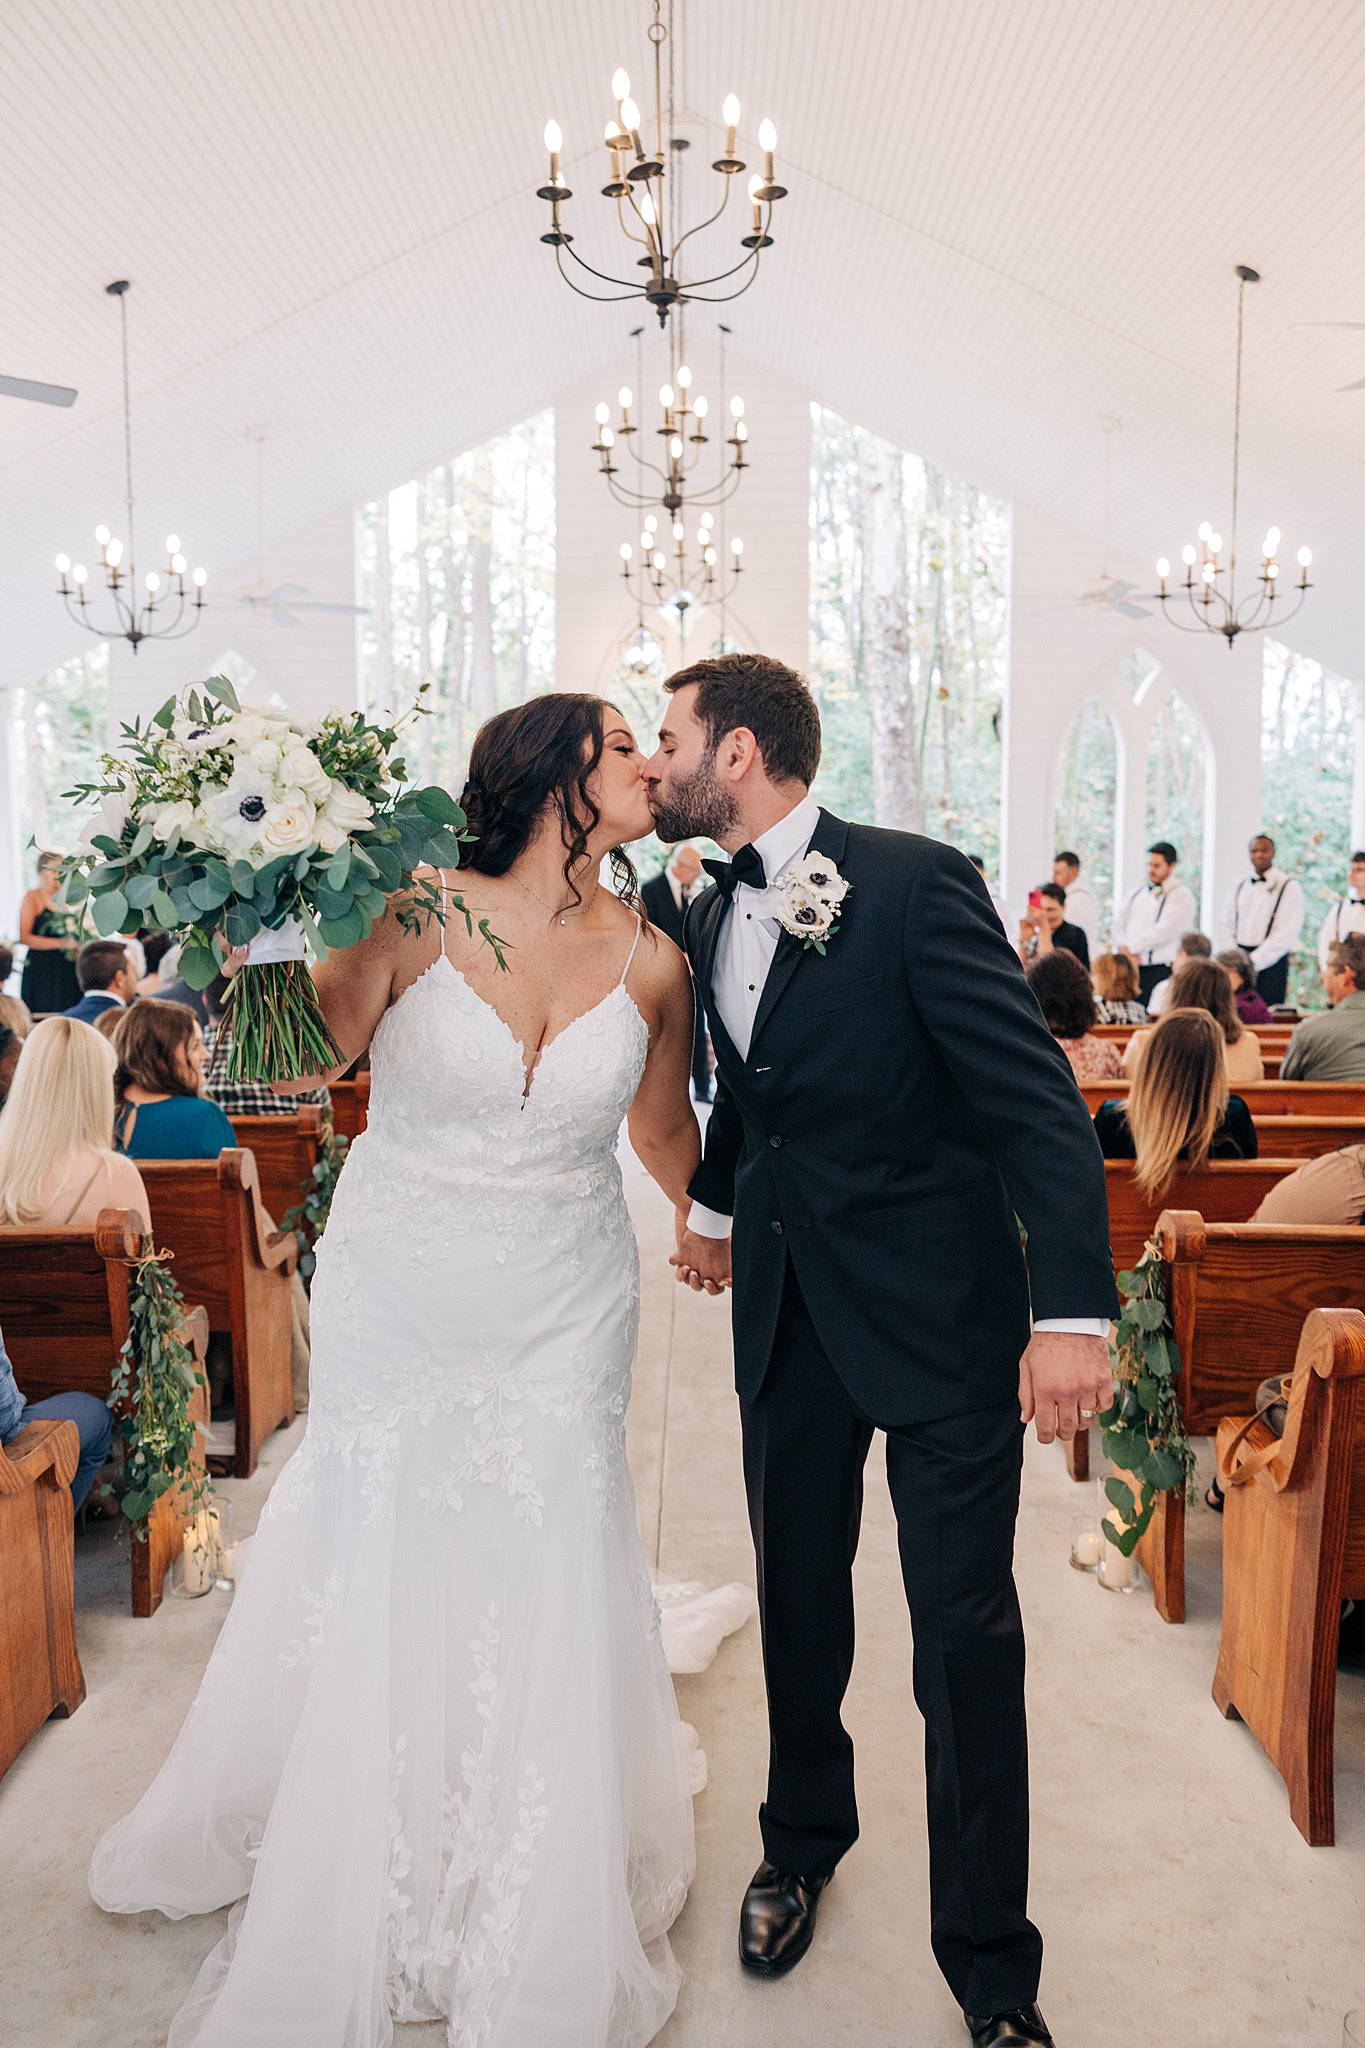 Newlyweds kiss while exiting their wedding ceremony filled with guests